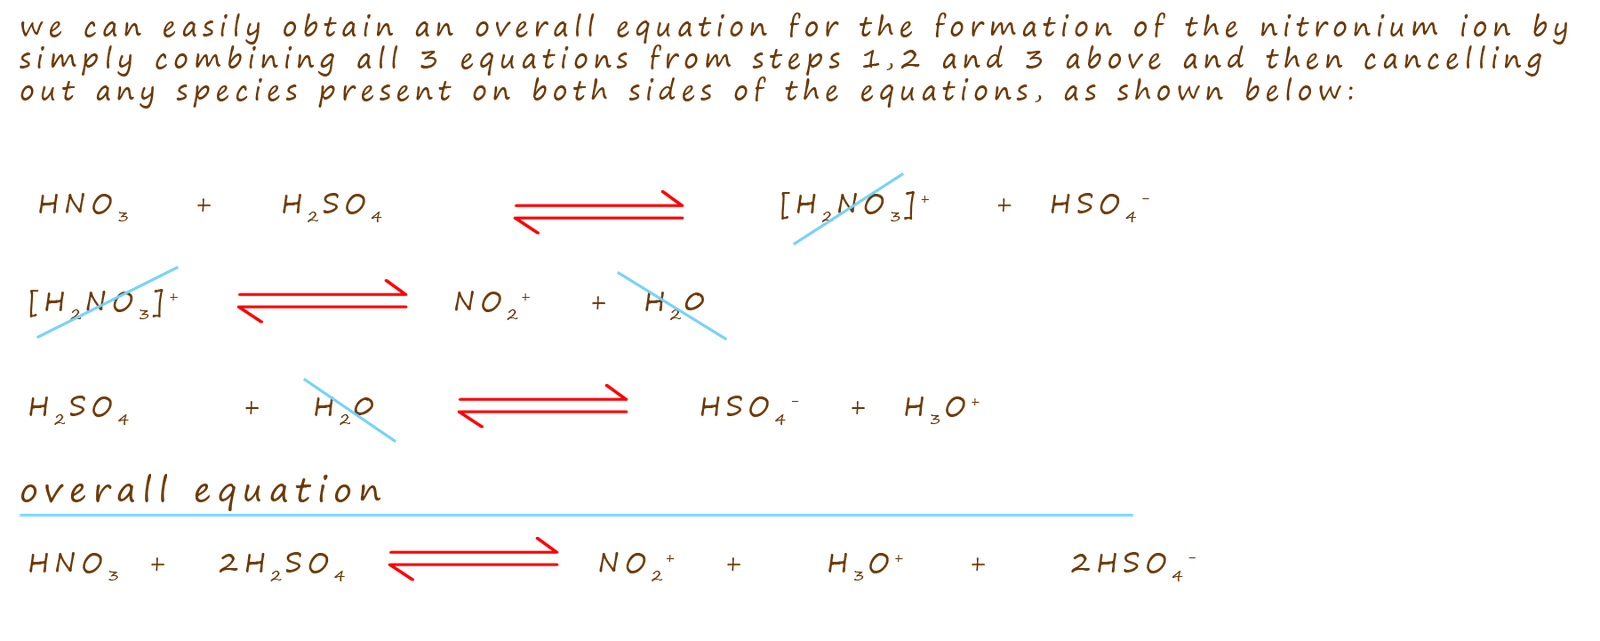 overall equation for the formation of the nitronium ion